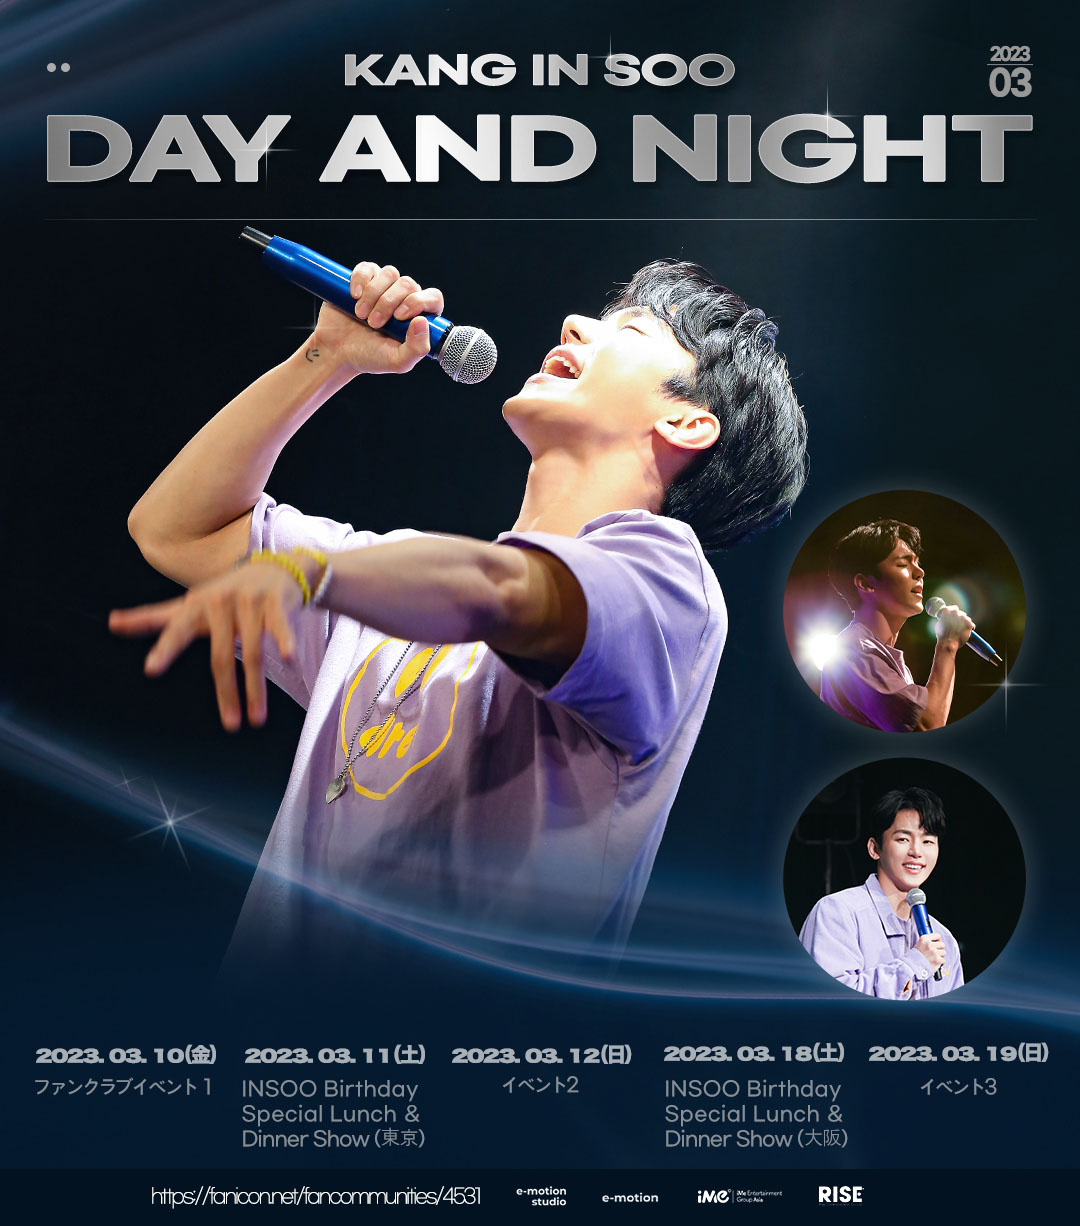 KANG IN SOO DAY AND NIGHT